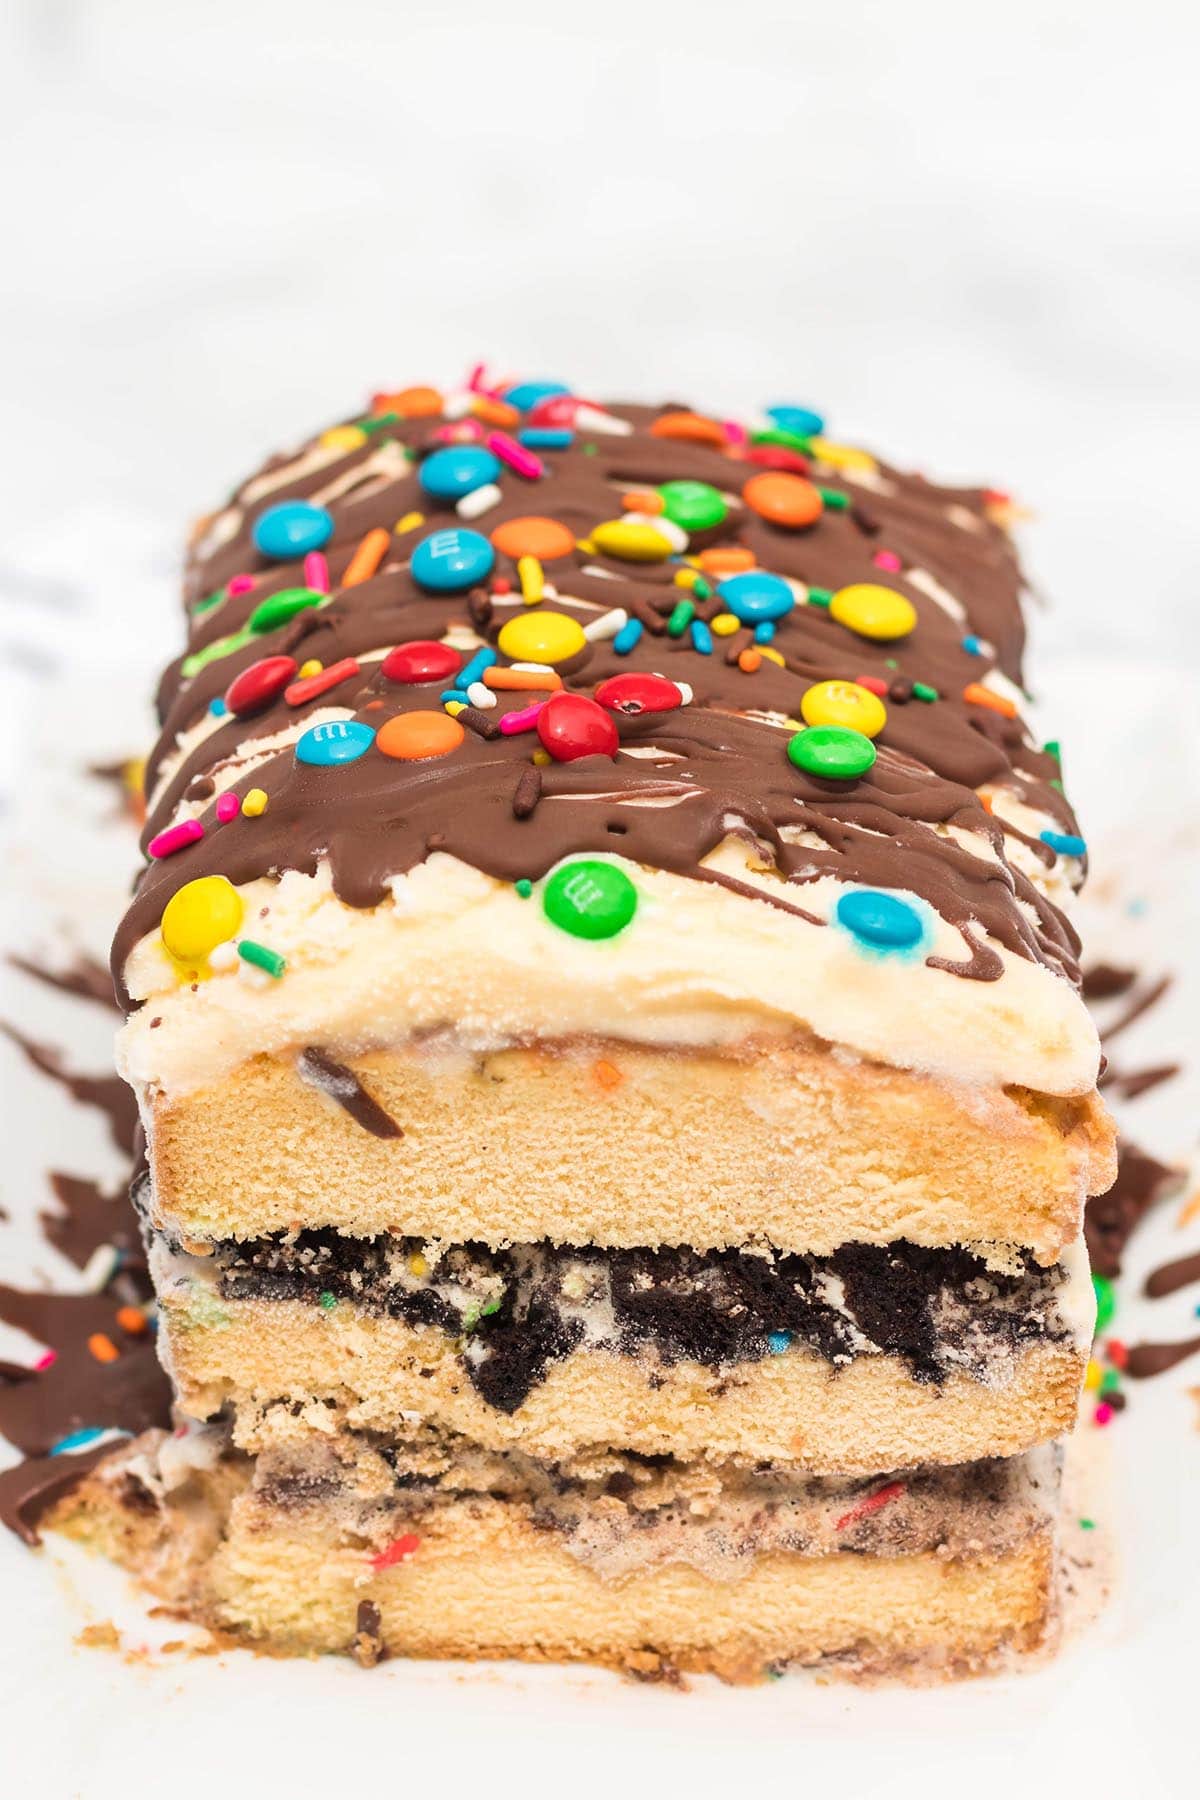 easy ice cream cake topped with chocolate sauce and mini m&m's.